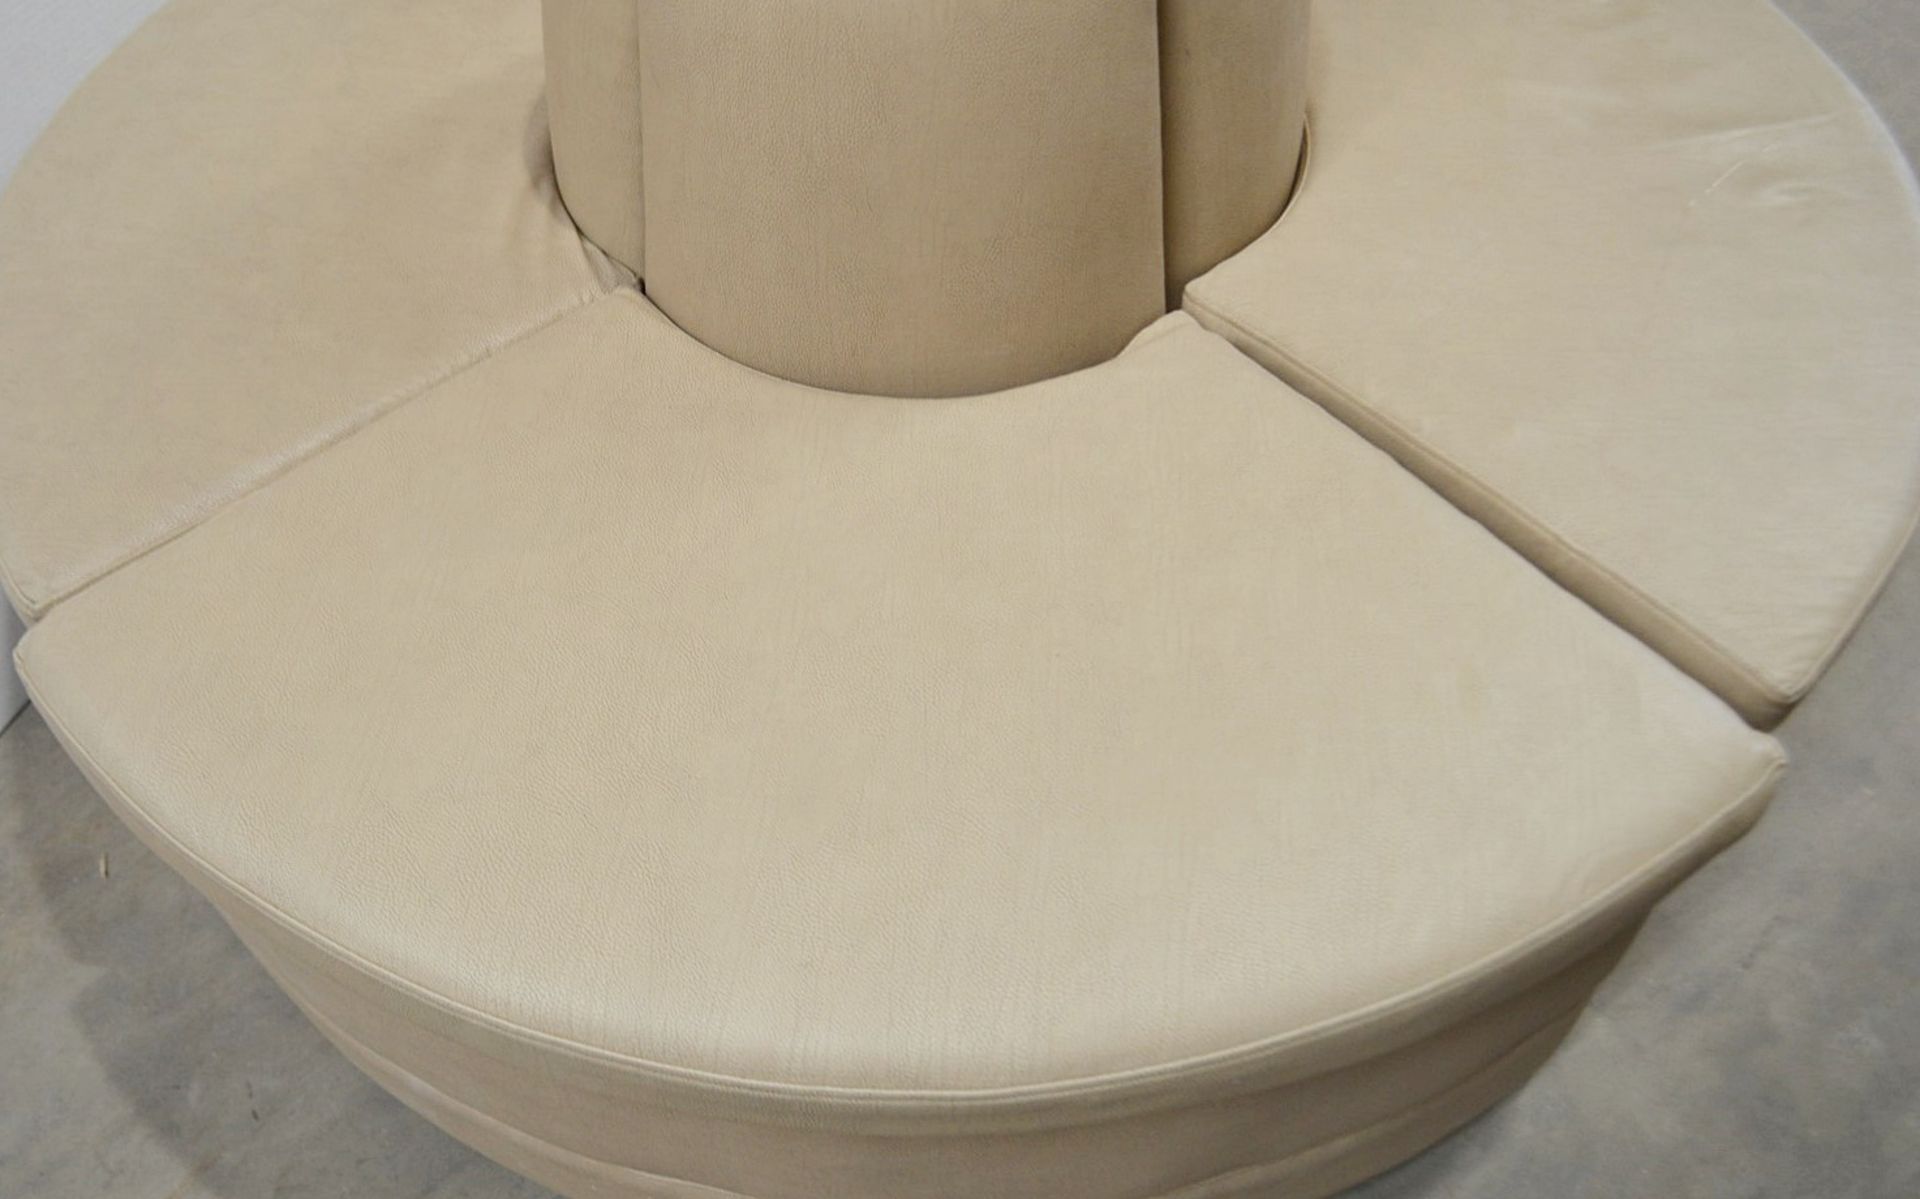 1 x Circular 4-Section Banquet Seating, Upholstered In A Premium Mocha Coloured Faux Leather - Image 8 of 10